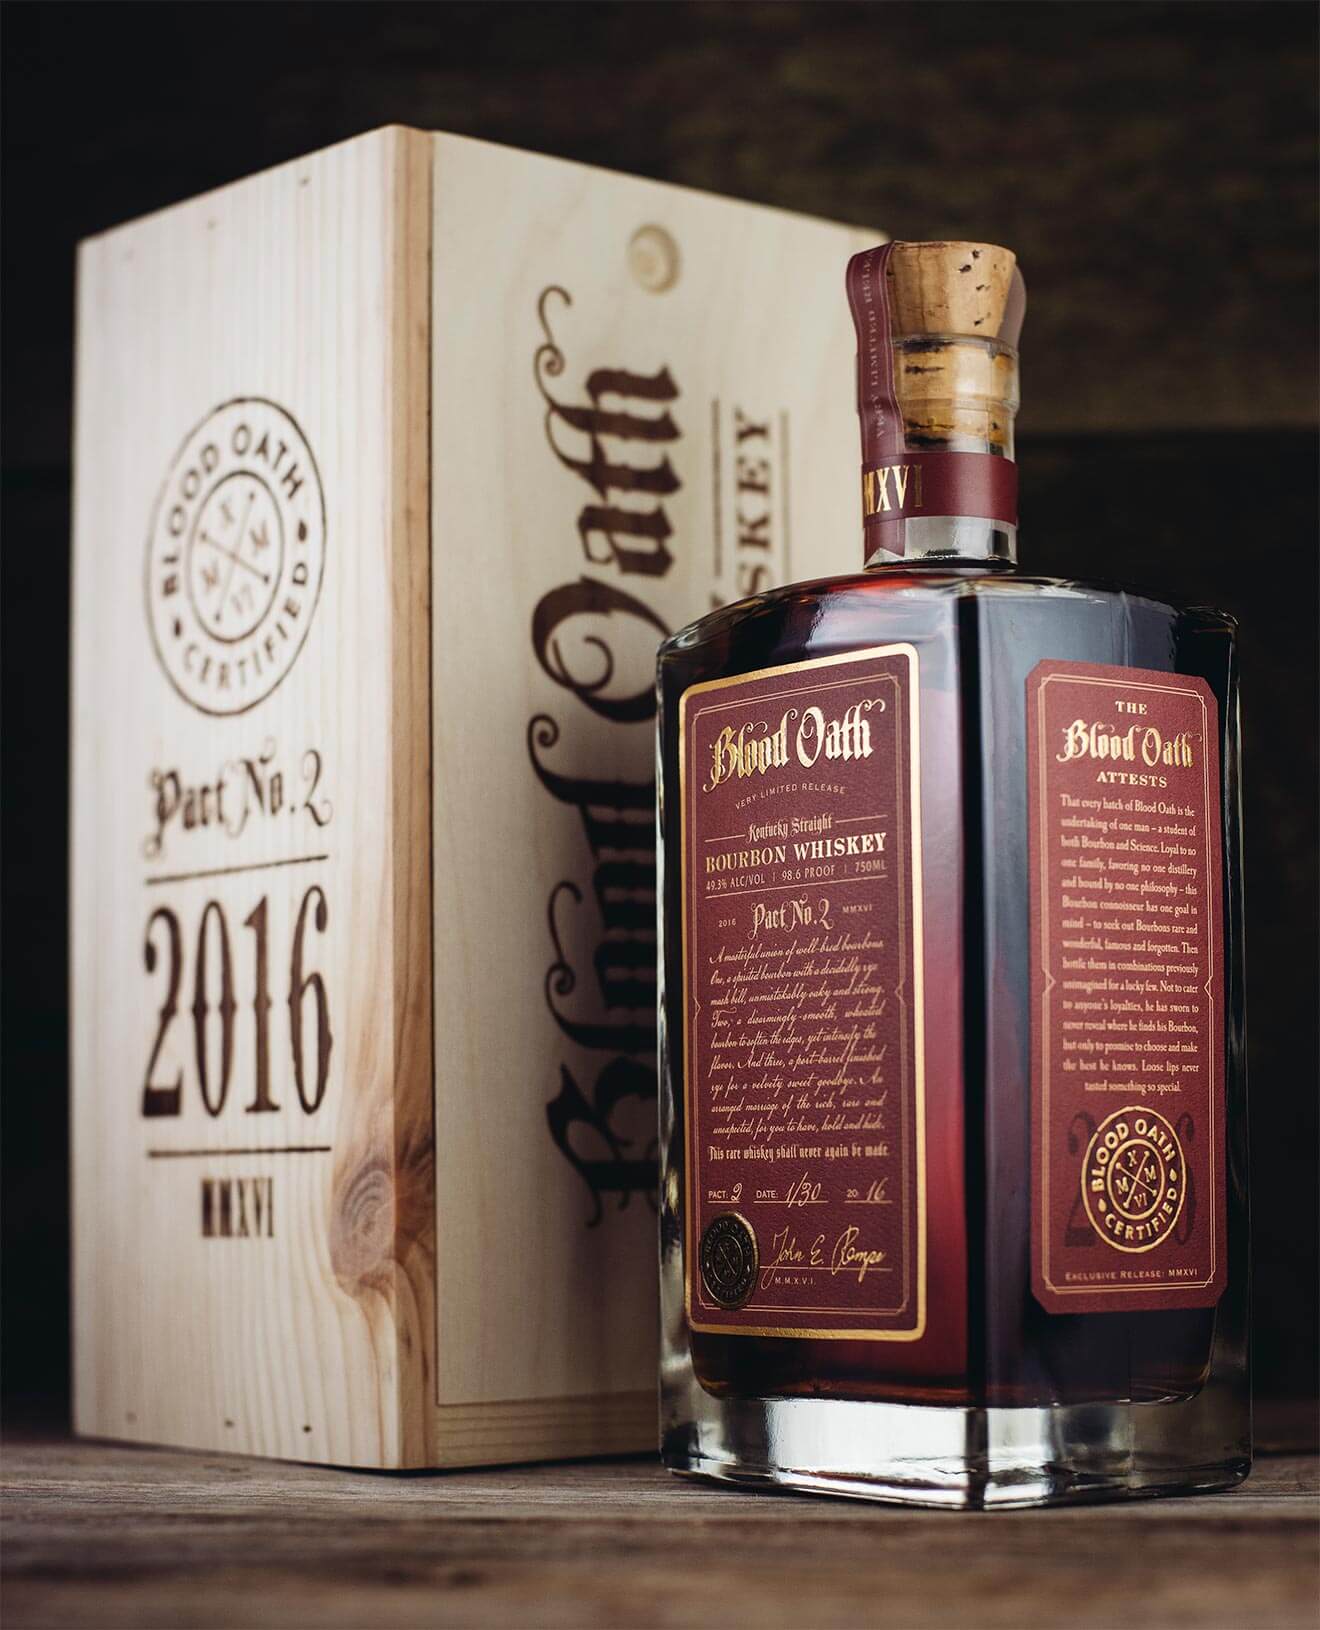 Blood Oath Pact No. 2, Bottle and Packaging, featured brands